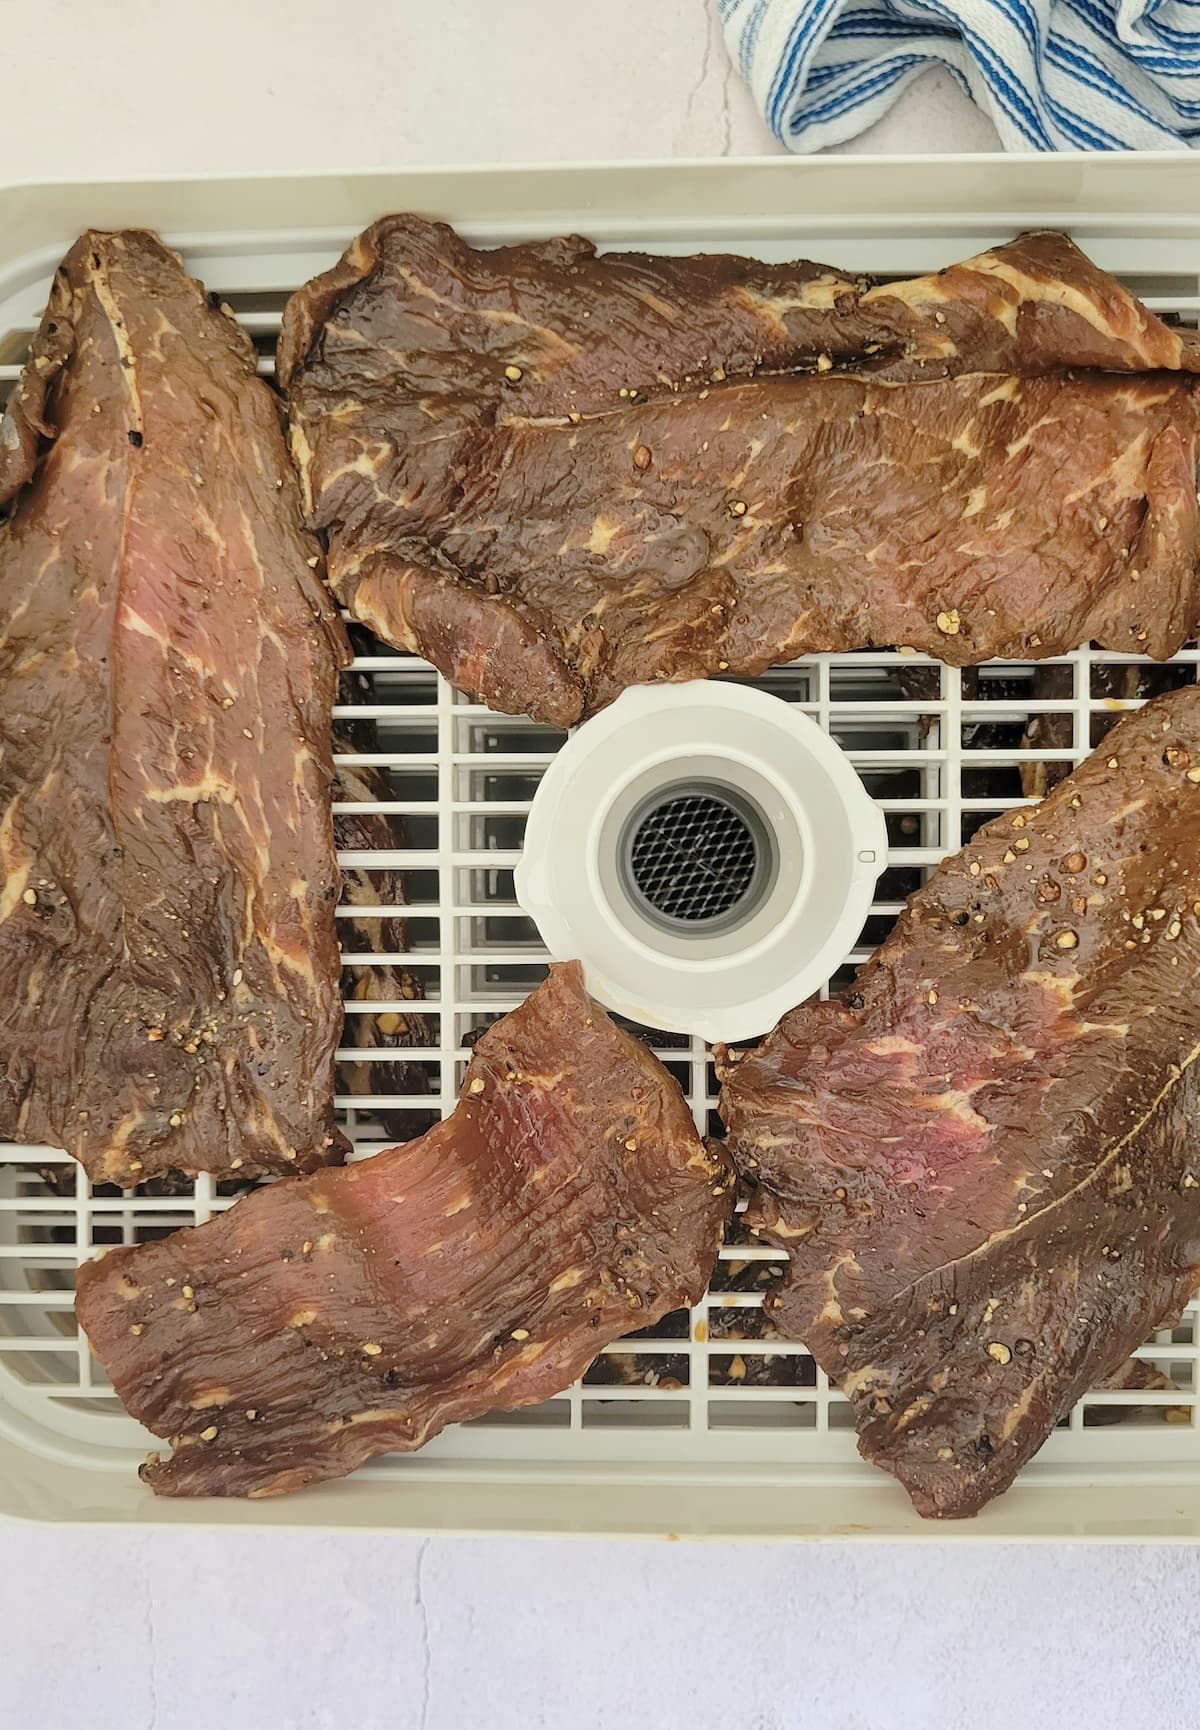 4 slices of rhalf cooked meat in a dehydrator